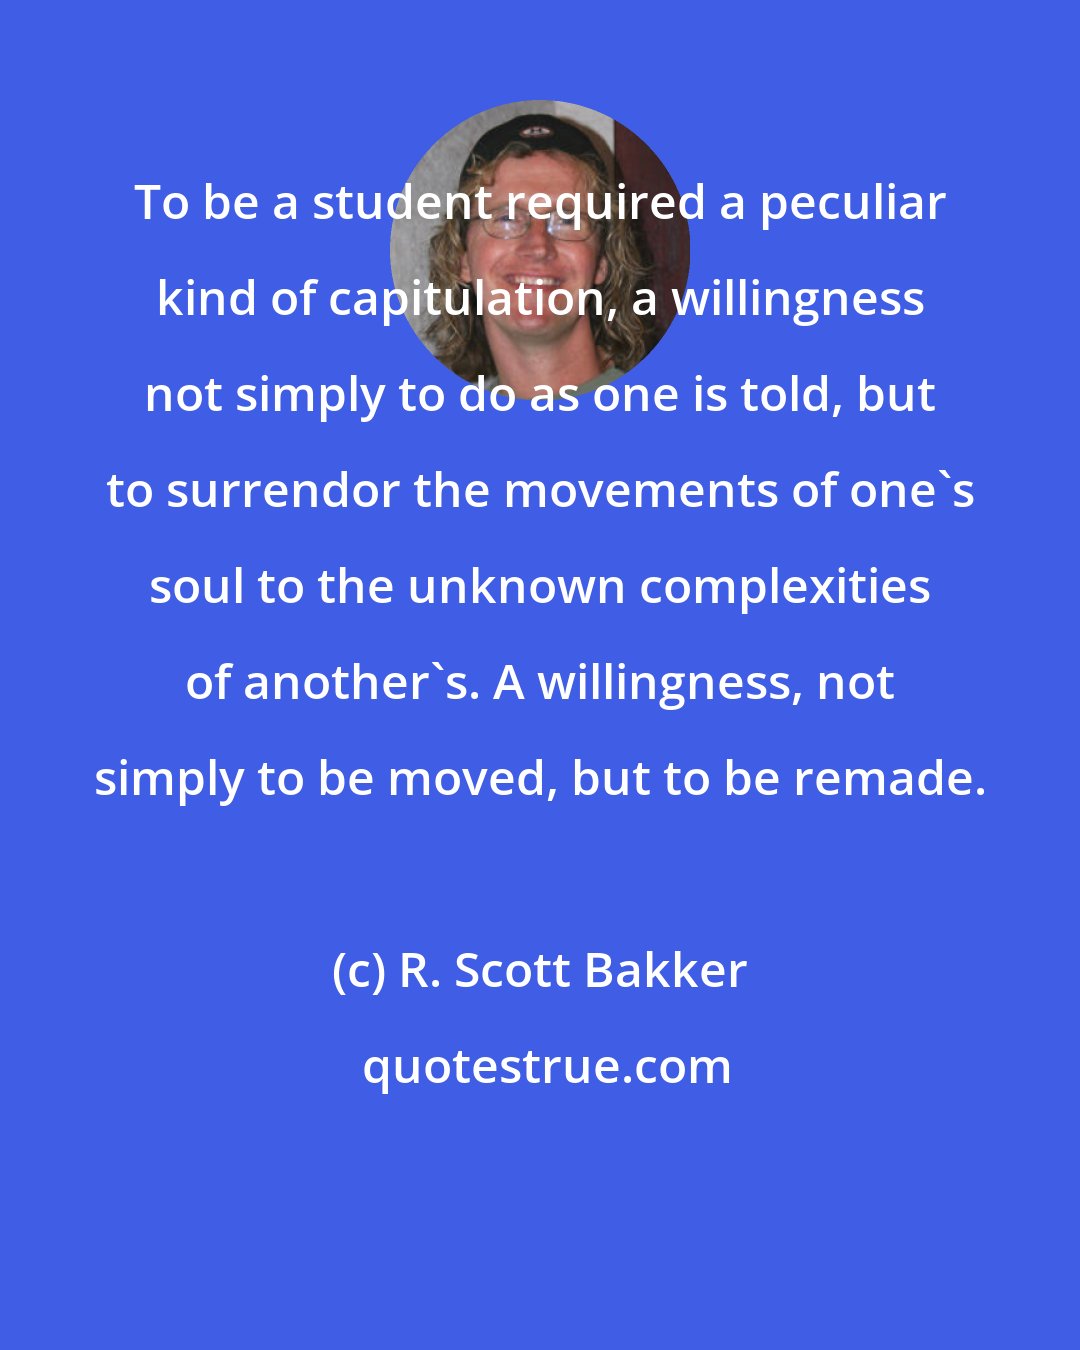 R. Scott Bakker: To be a student required a peculiar kind of capitulation, a willingness not simply to do as one is told, but to surrendor the movements of one's soul to the unknown complexities of another's. A willingness, not simply to be moved, but to be remade.